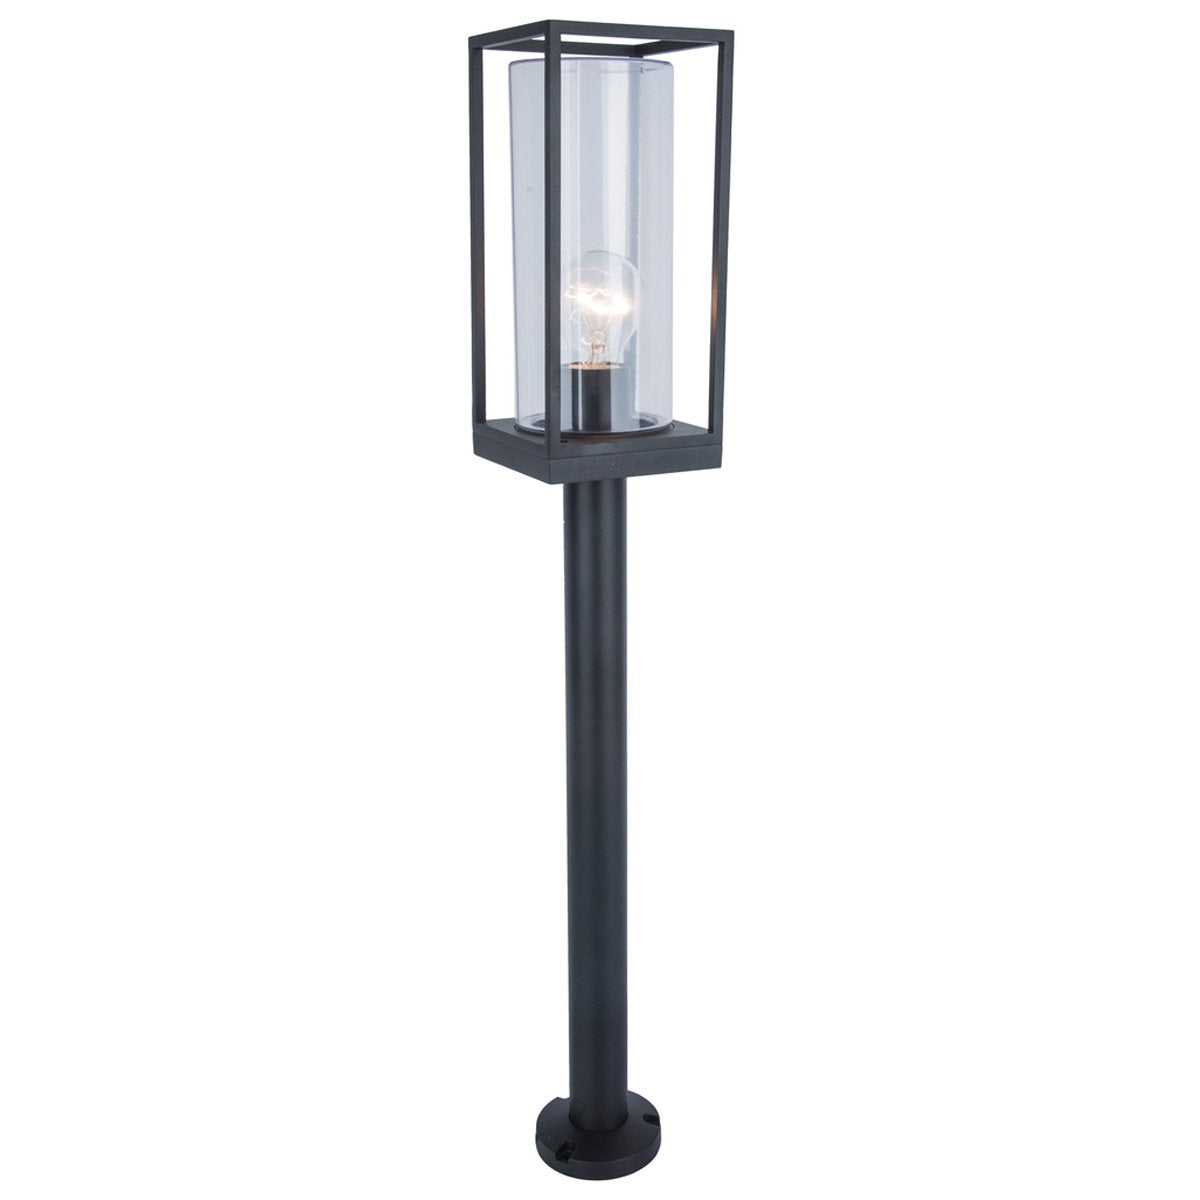 The classic Chloe outdoor lantern is appropriate for both entrance and garden lighting. Chloe is not only aesthetically pleasing, but also a functional outdoor lamp. Because of the IP44 rating, the lamp is splash-proof and suitable for use outside. It will unquestionably add atmosphere to your garden. 